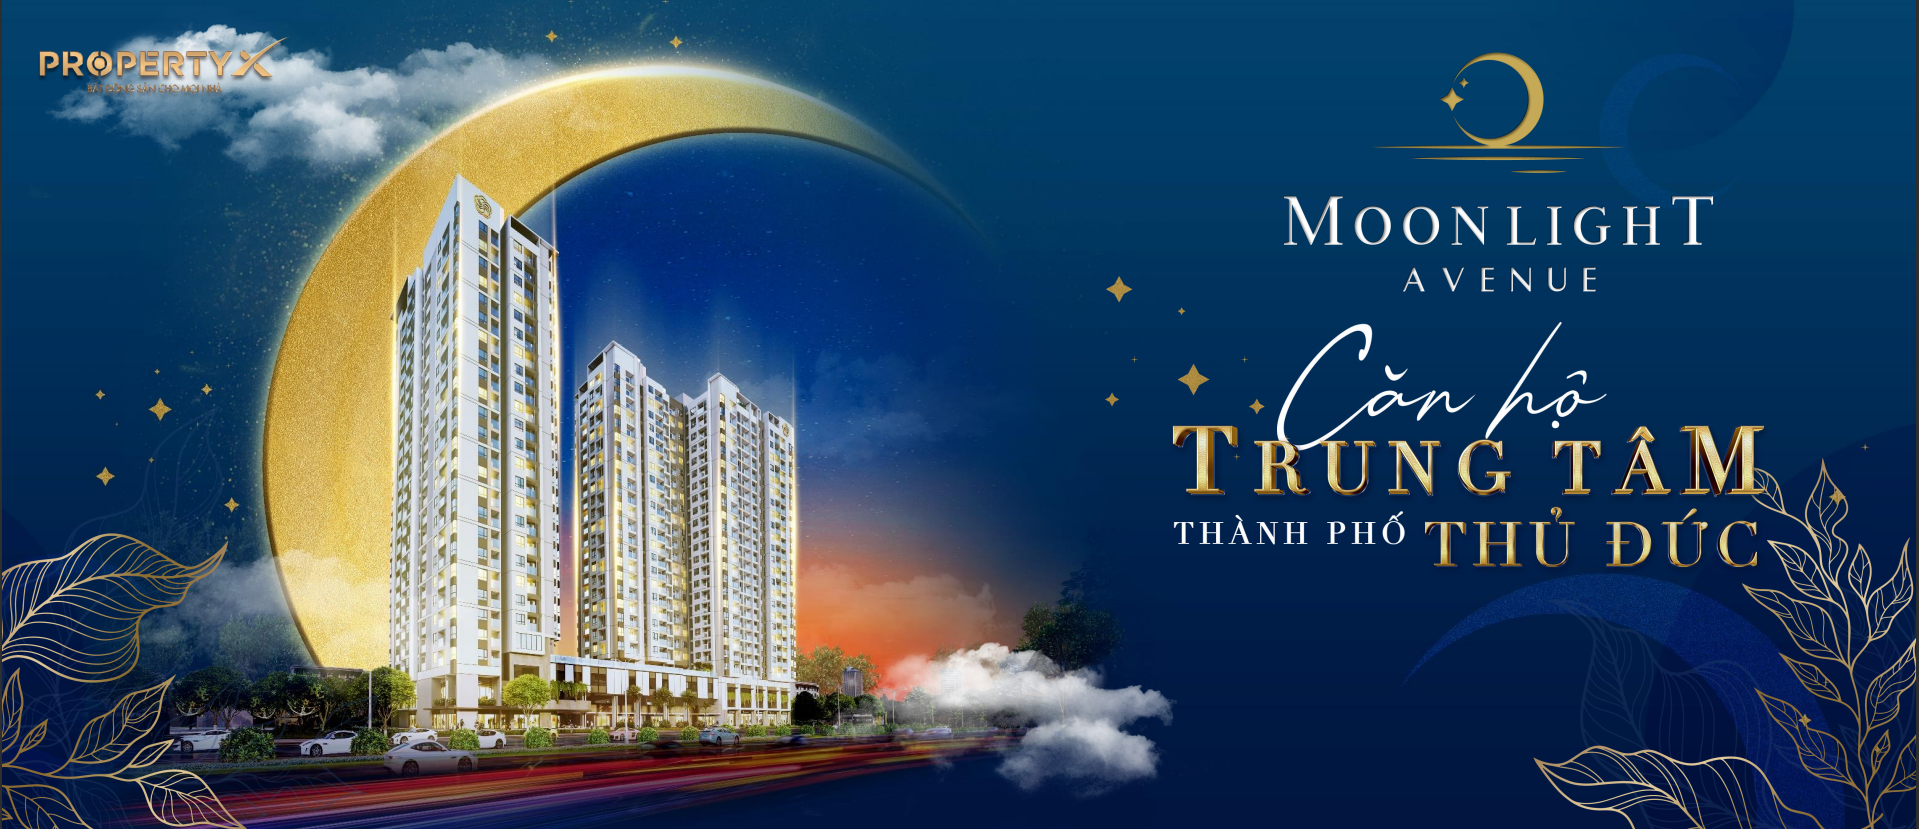 Moonlight-Avenue-can-ho-trung-tam-thanh-pho-thu-duc